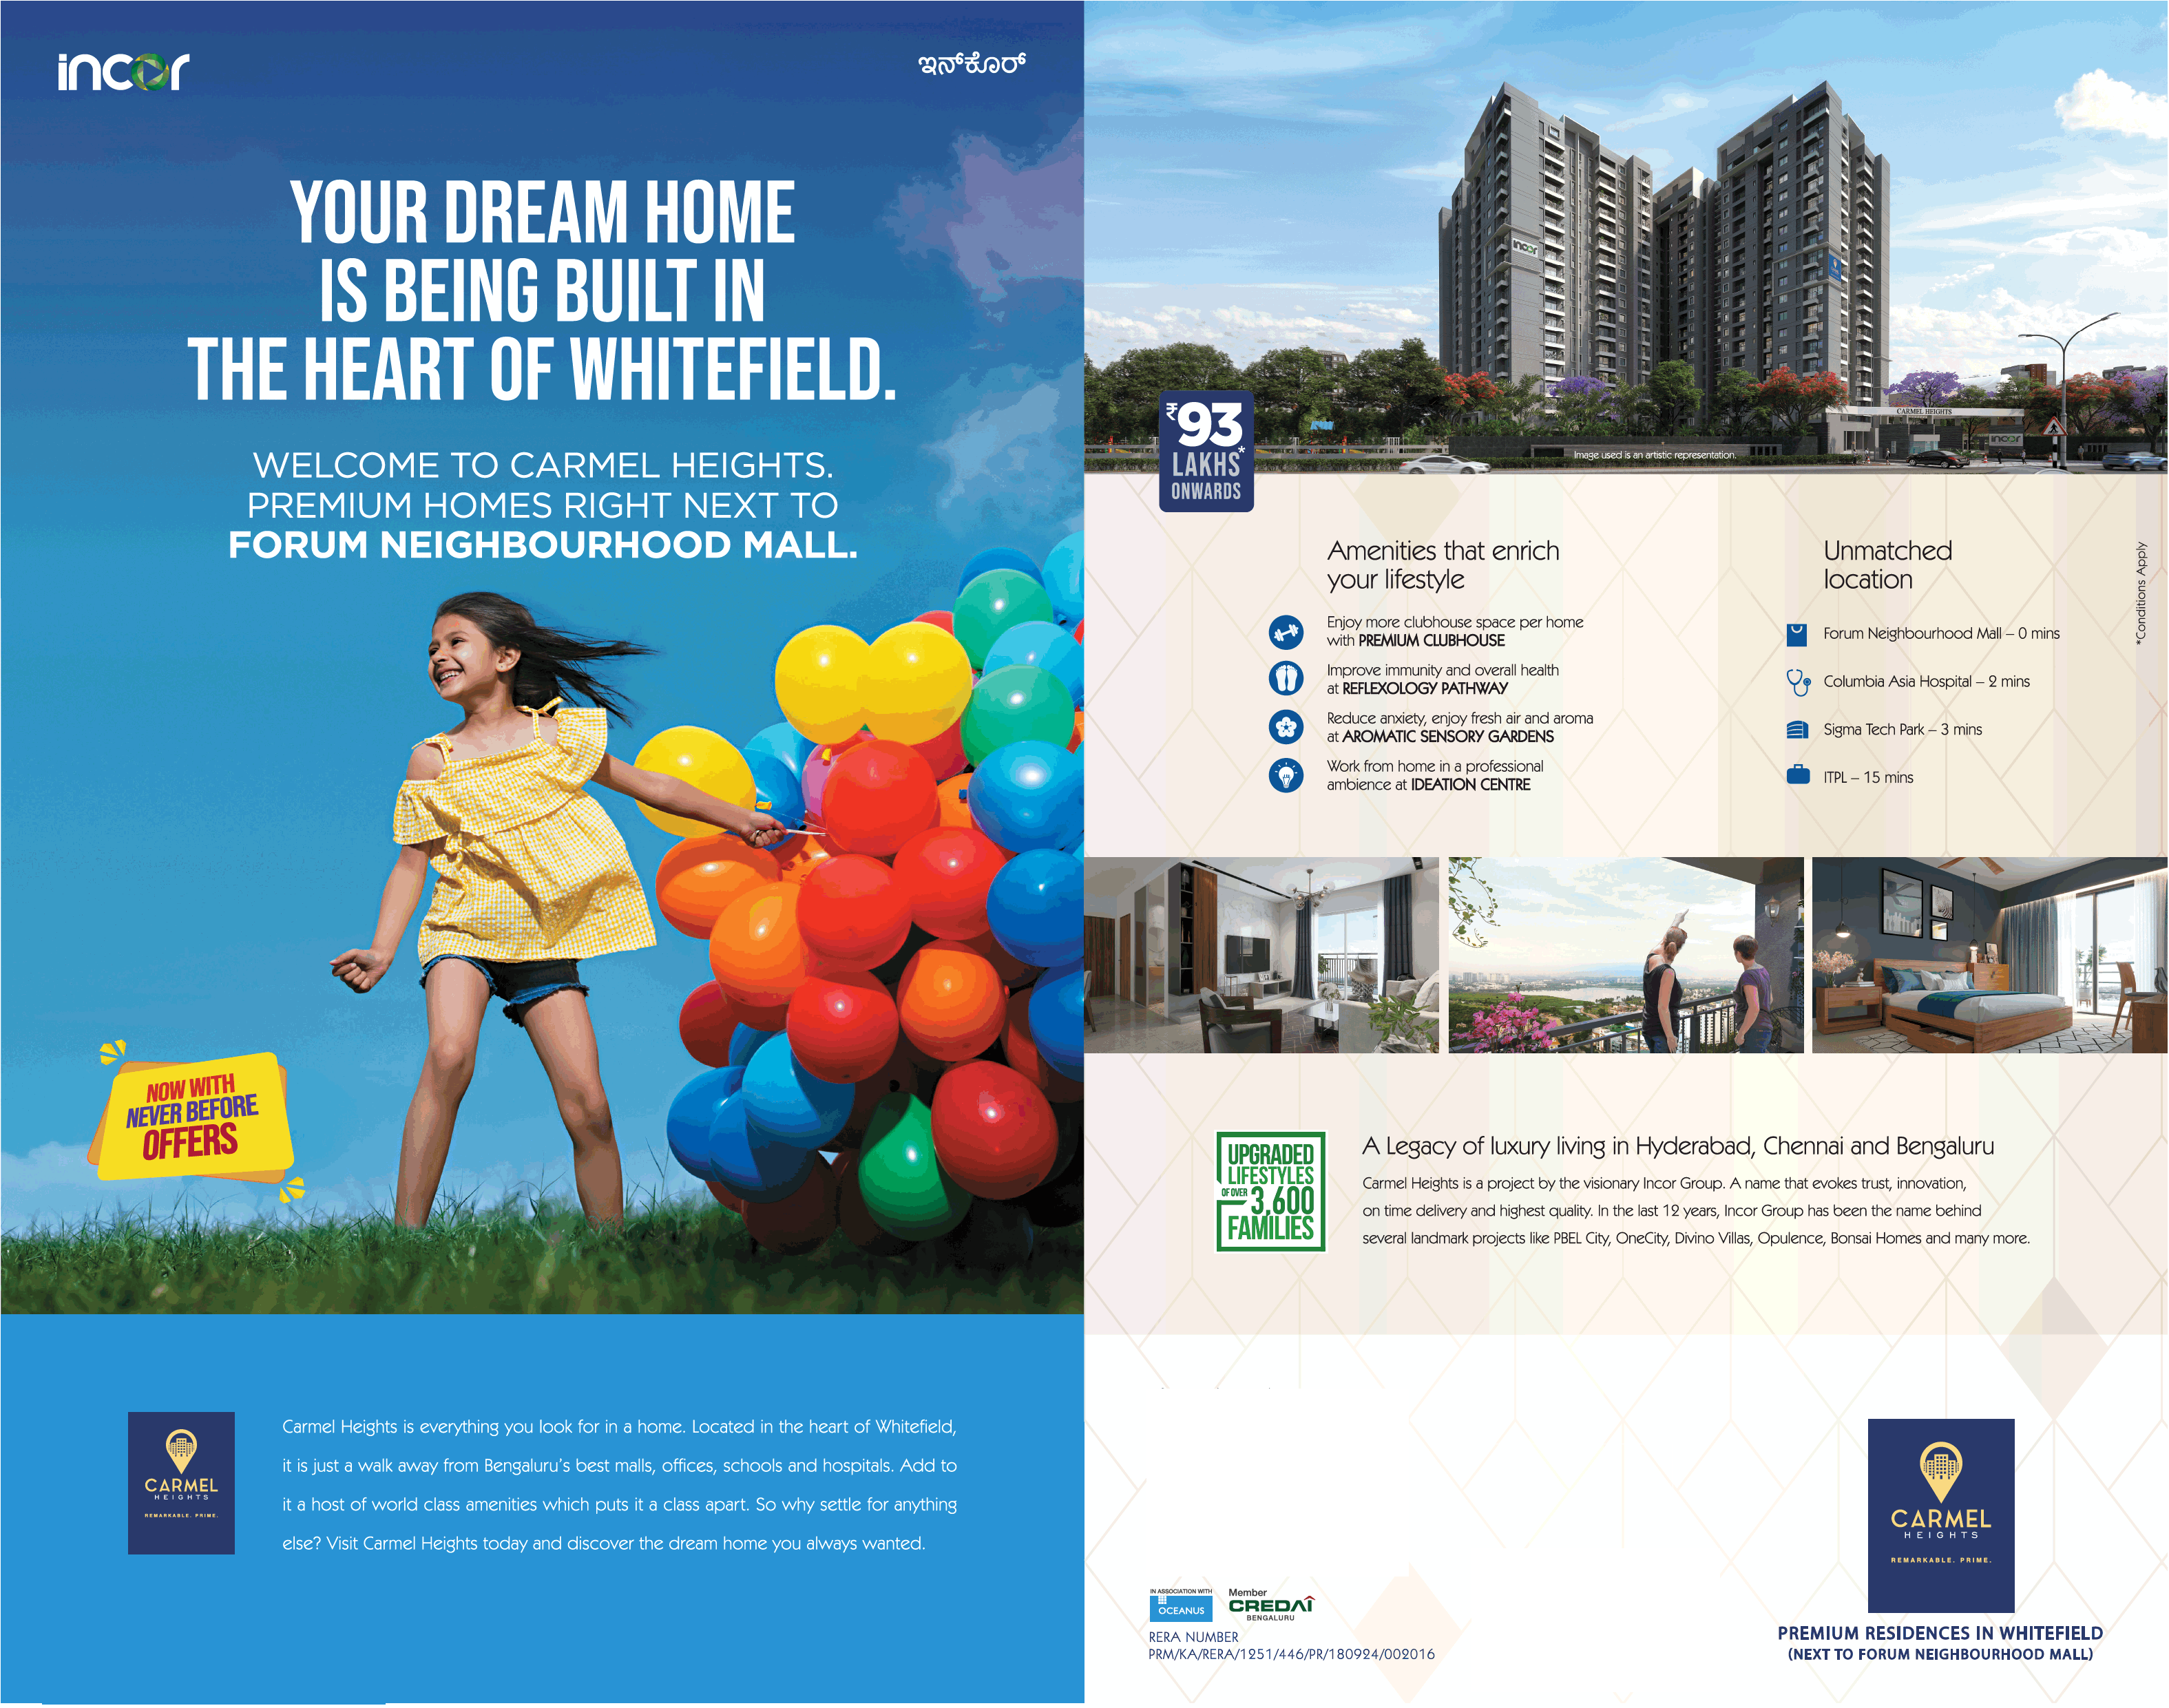 Book apartment start at Rs 93 lakh onwards at Incor Carmel Heights, Whitefield Bangalore Update